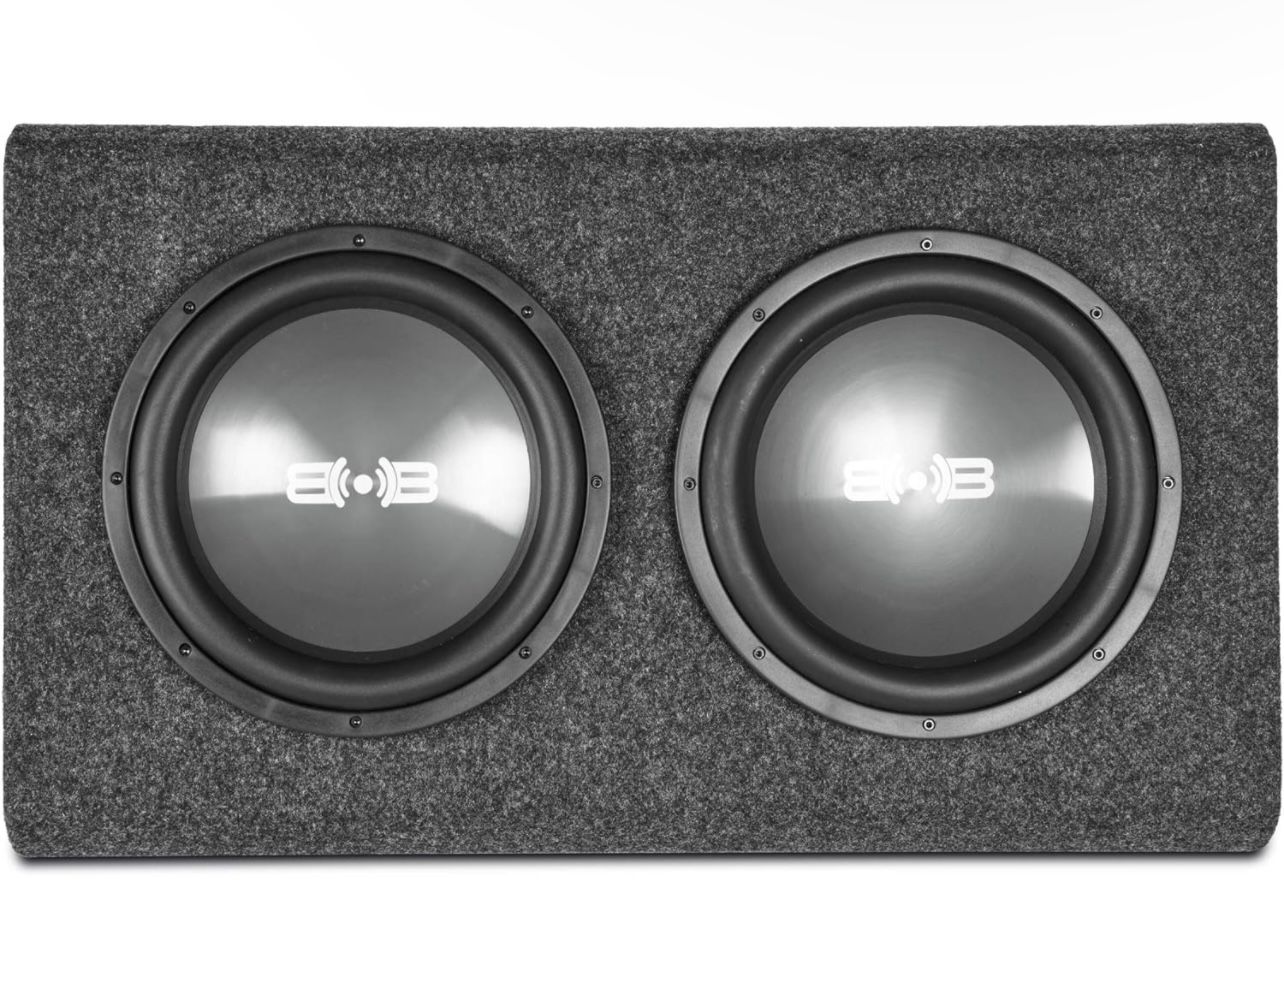 Dual 12" Vented / Ported Subwoofer Enclosure with Built-In Amplifier